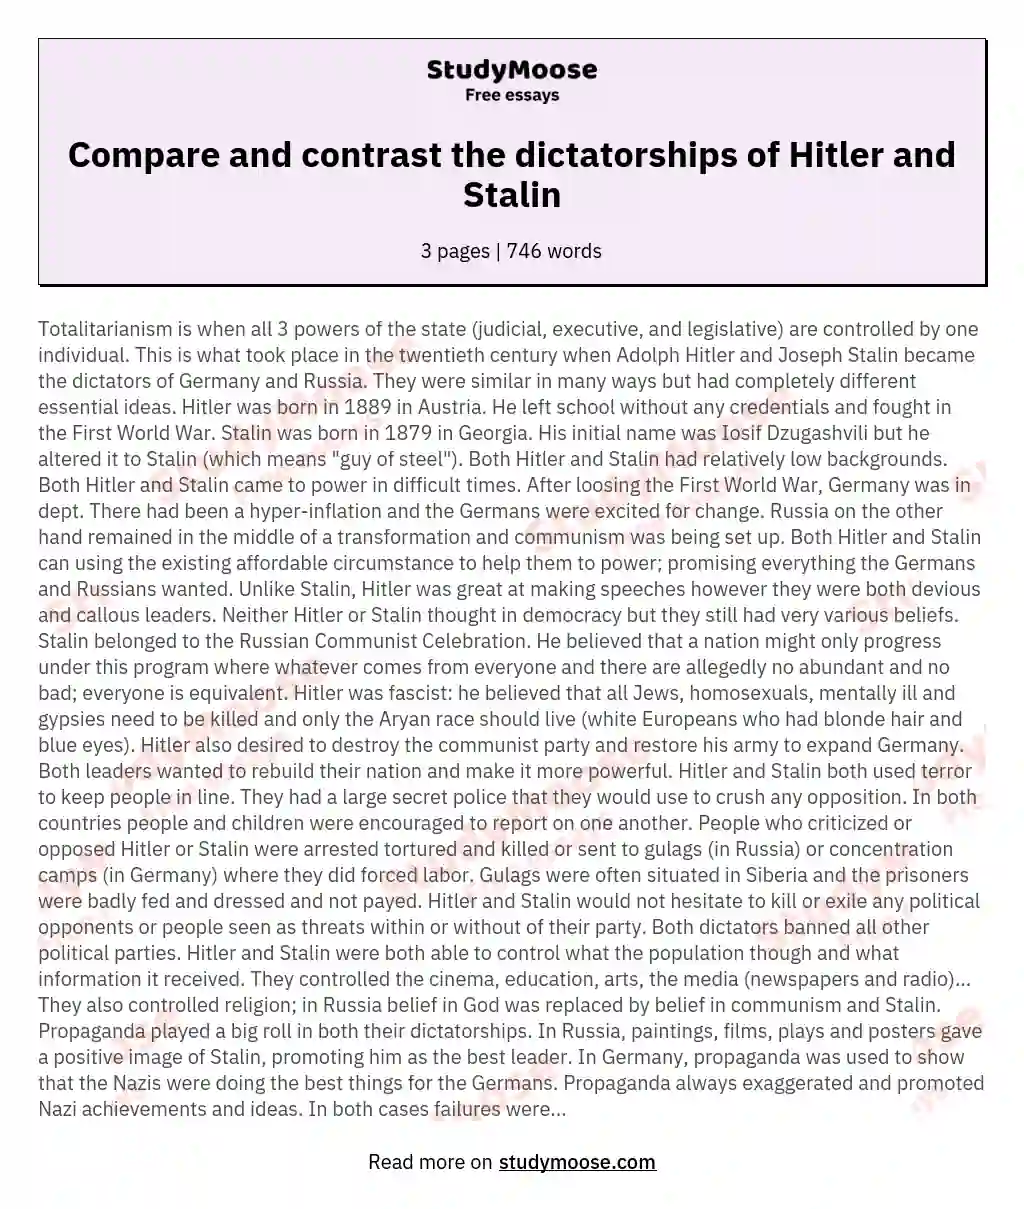 Compare and contrast the dictatorships of Hitler and Stalin